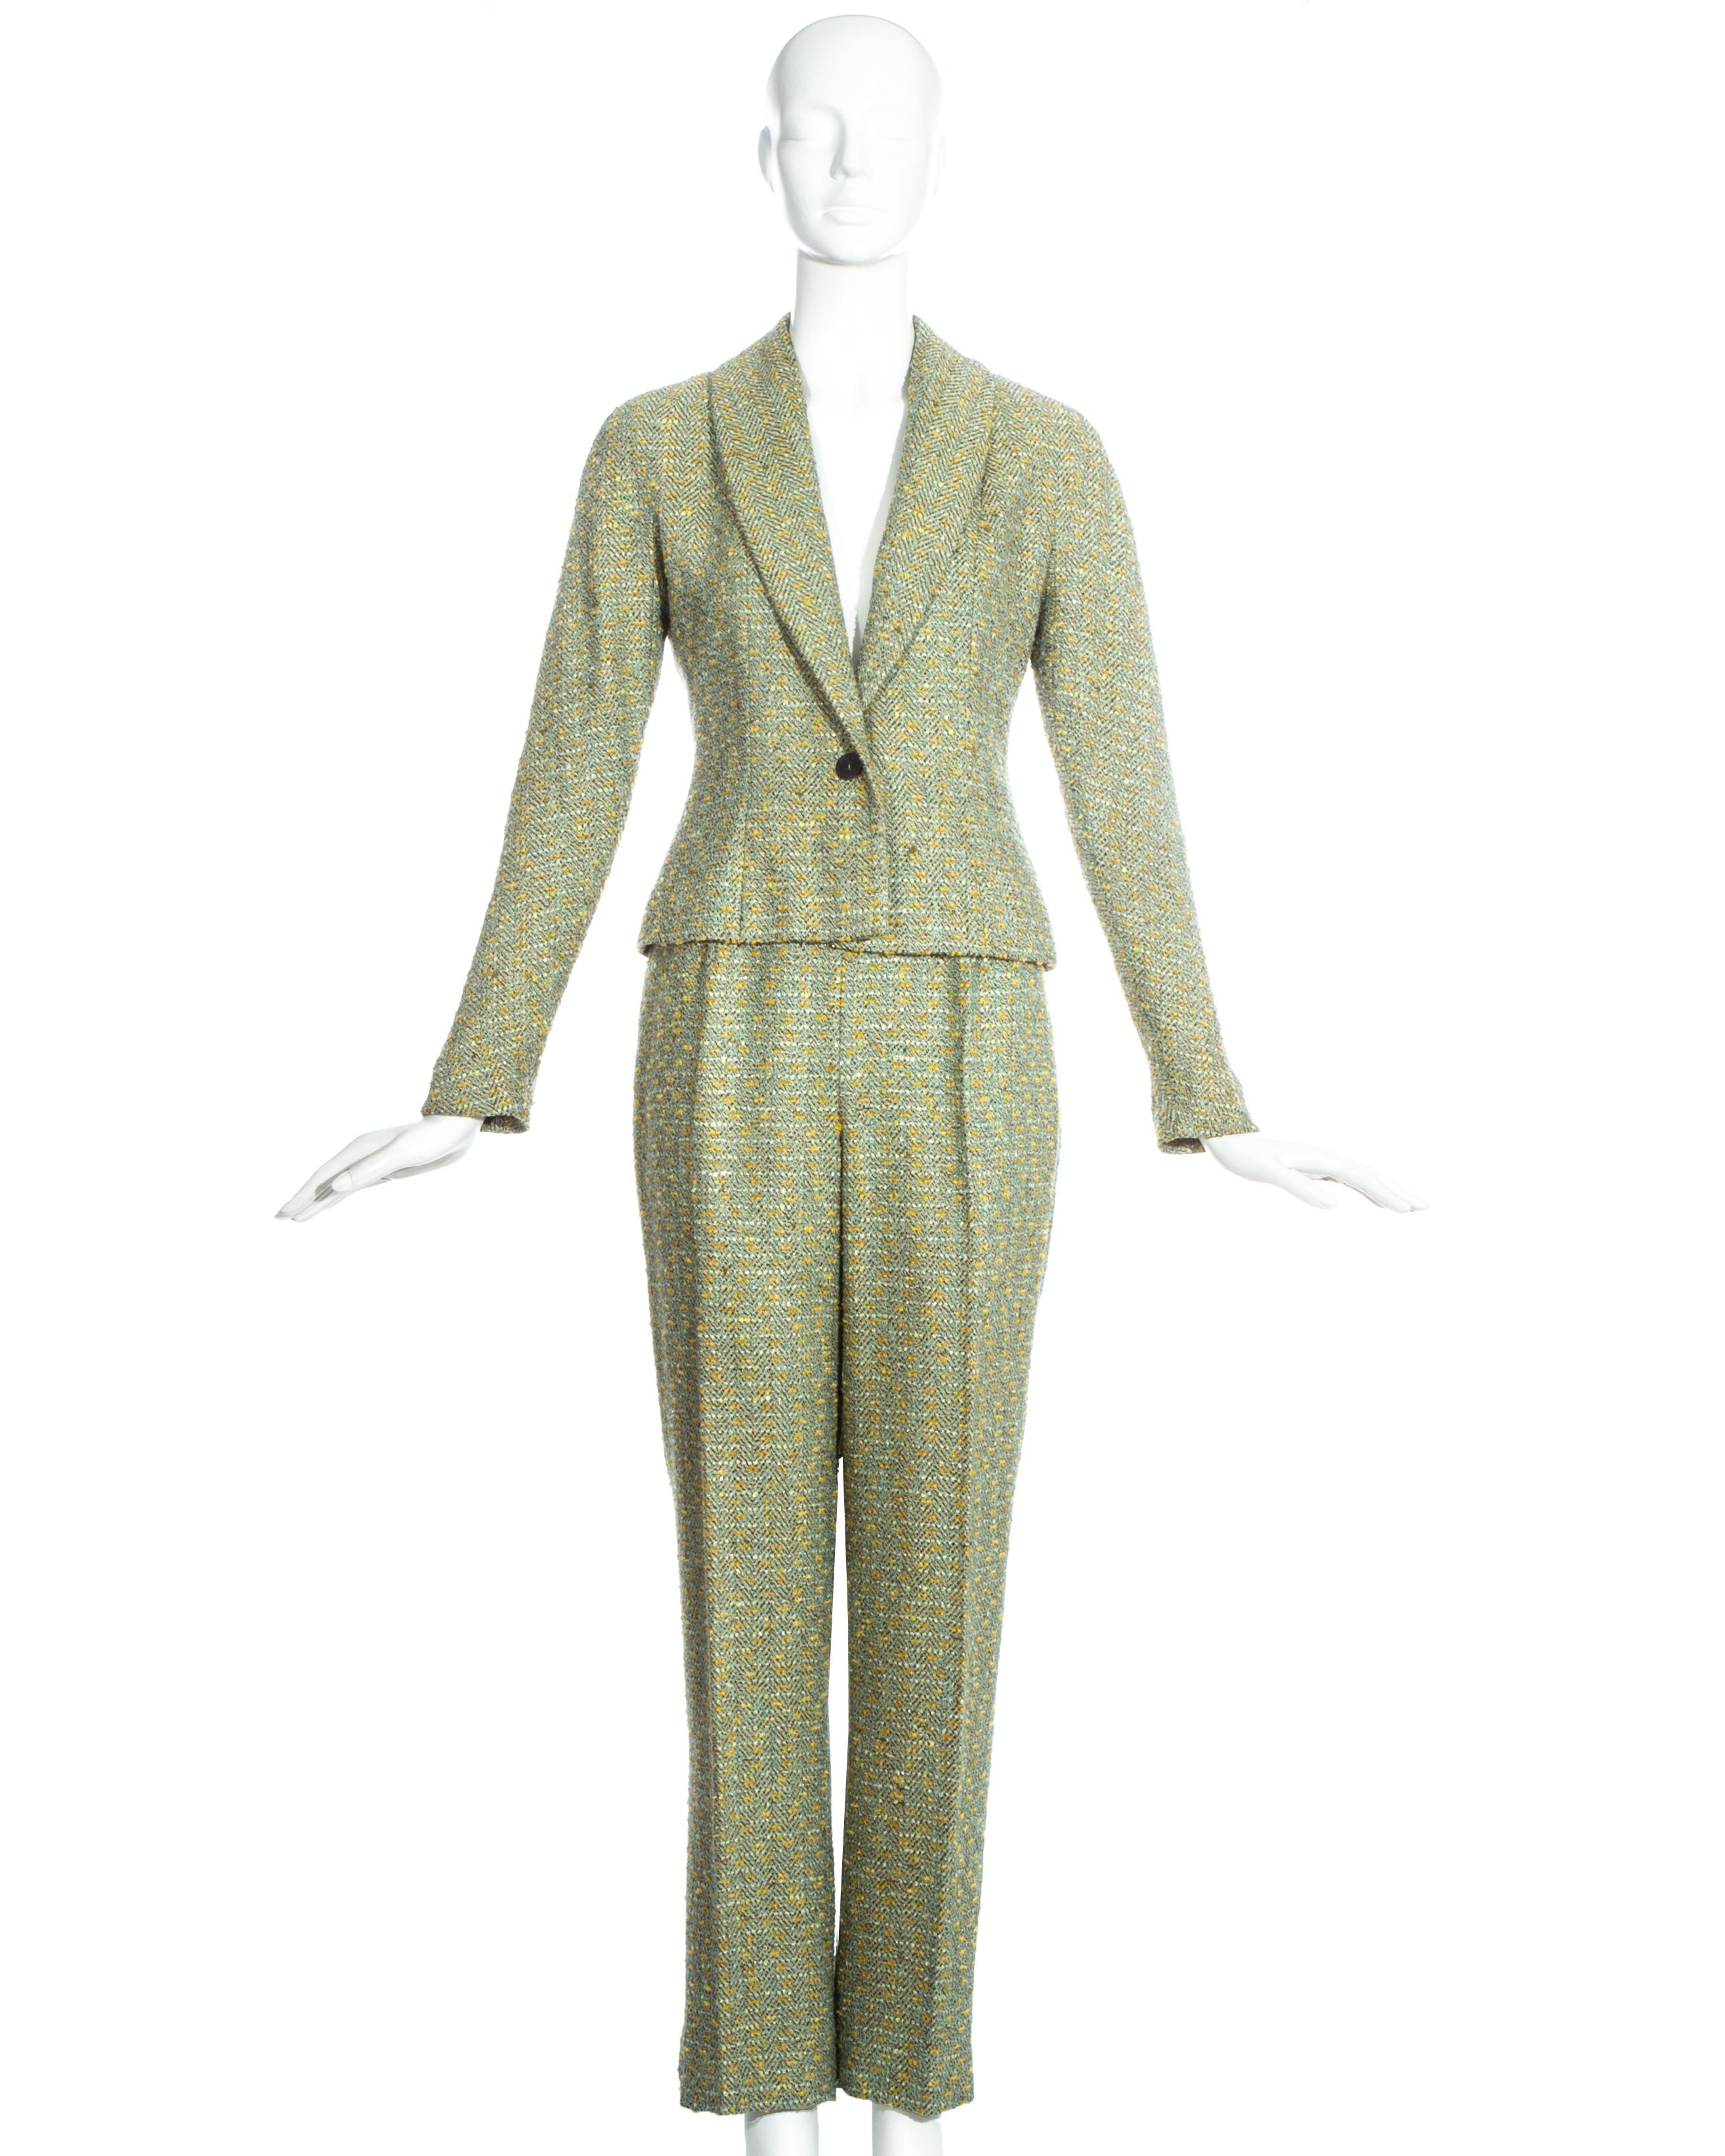 Christian Dior by John Galliano green tweed 3-piece suit comprising: single breasted blazer jacket with shawl lapel, straight leg pants and knee length pencil skirt.

Fall-Winter 1998